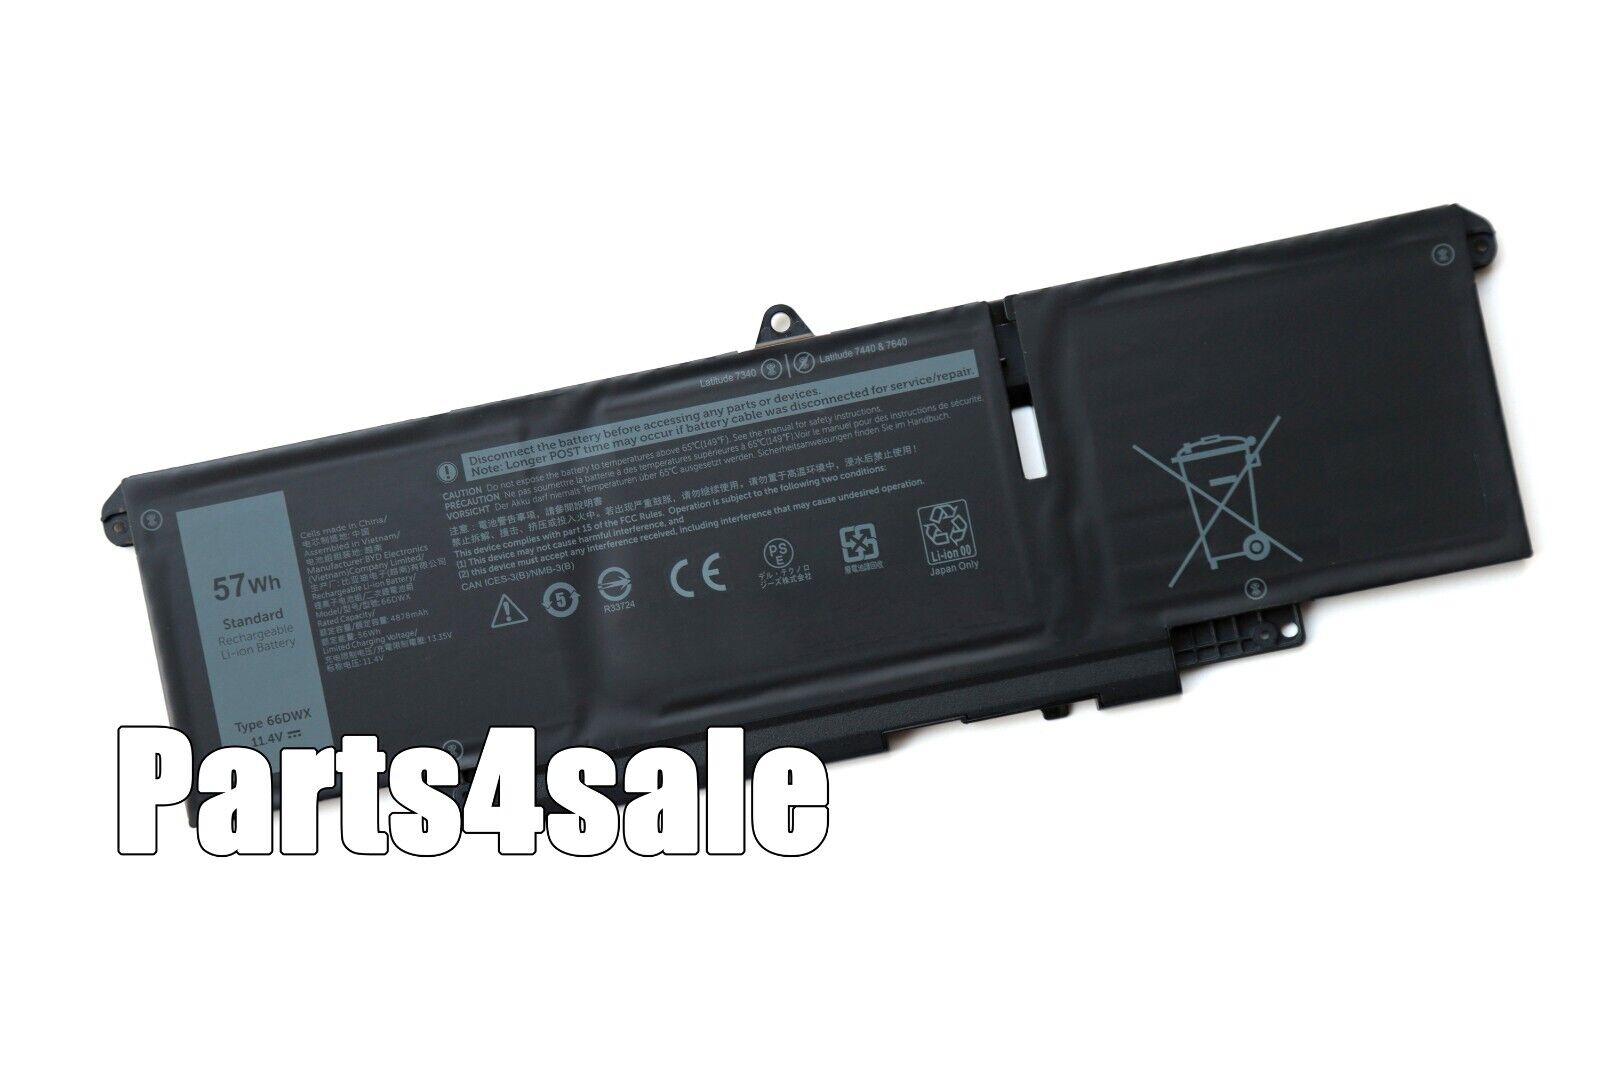 New 66DWX 57Wh Laptop Battery for Latitude 7340 7440 7640 Series WW8N8 047T0